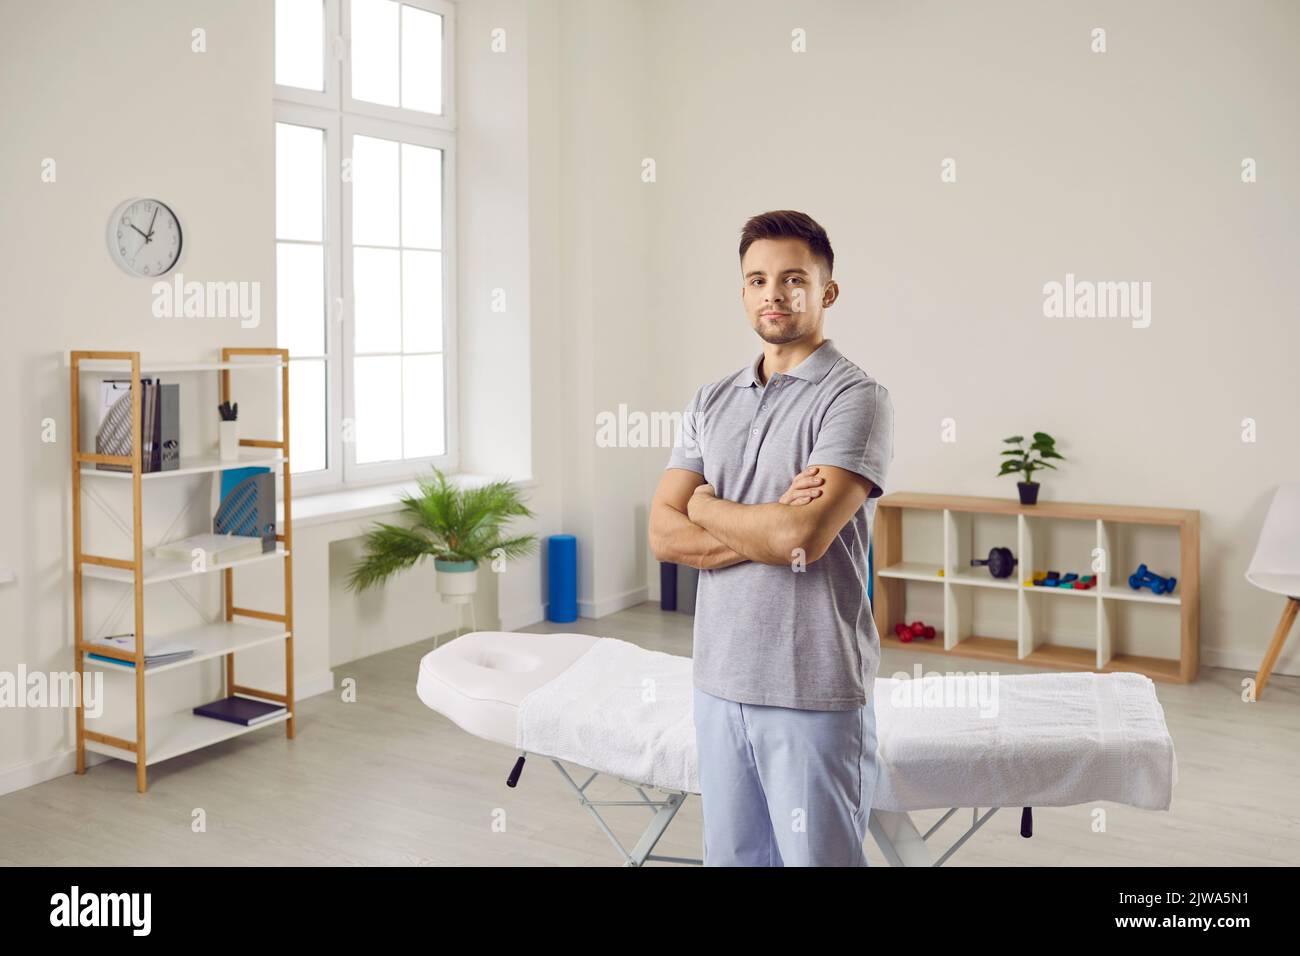 Male physiotherapist in uniform pose in clinic Stock Photo